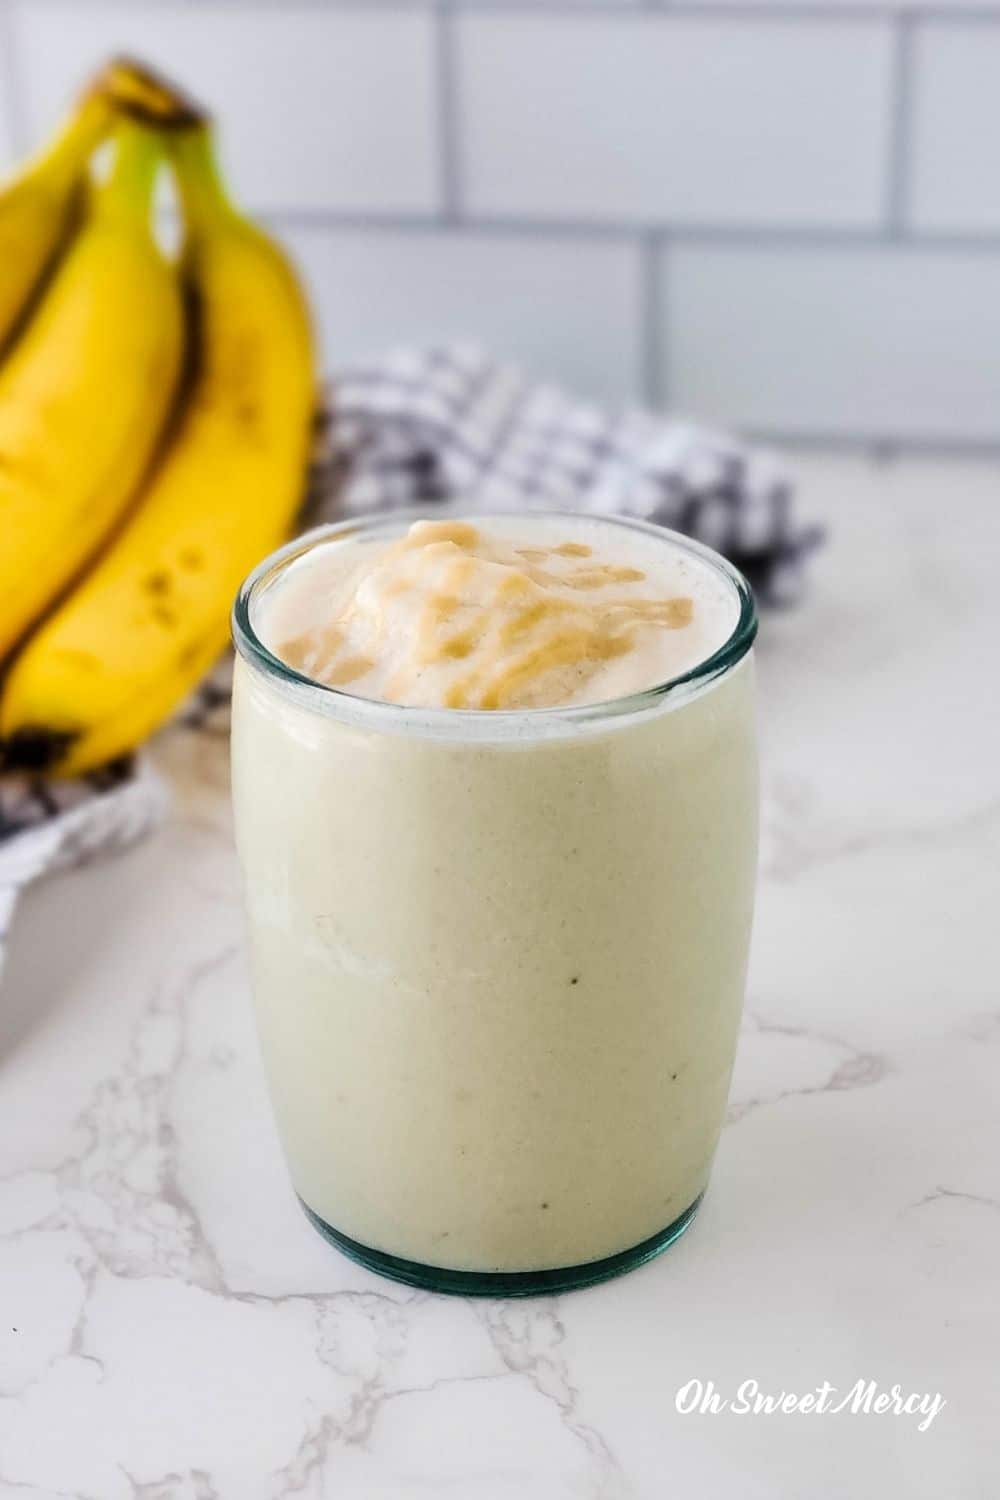 Glass of Banana Maple Tahini Smoothie on kitchen counter with bunch of bananas in background